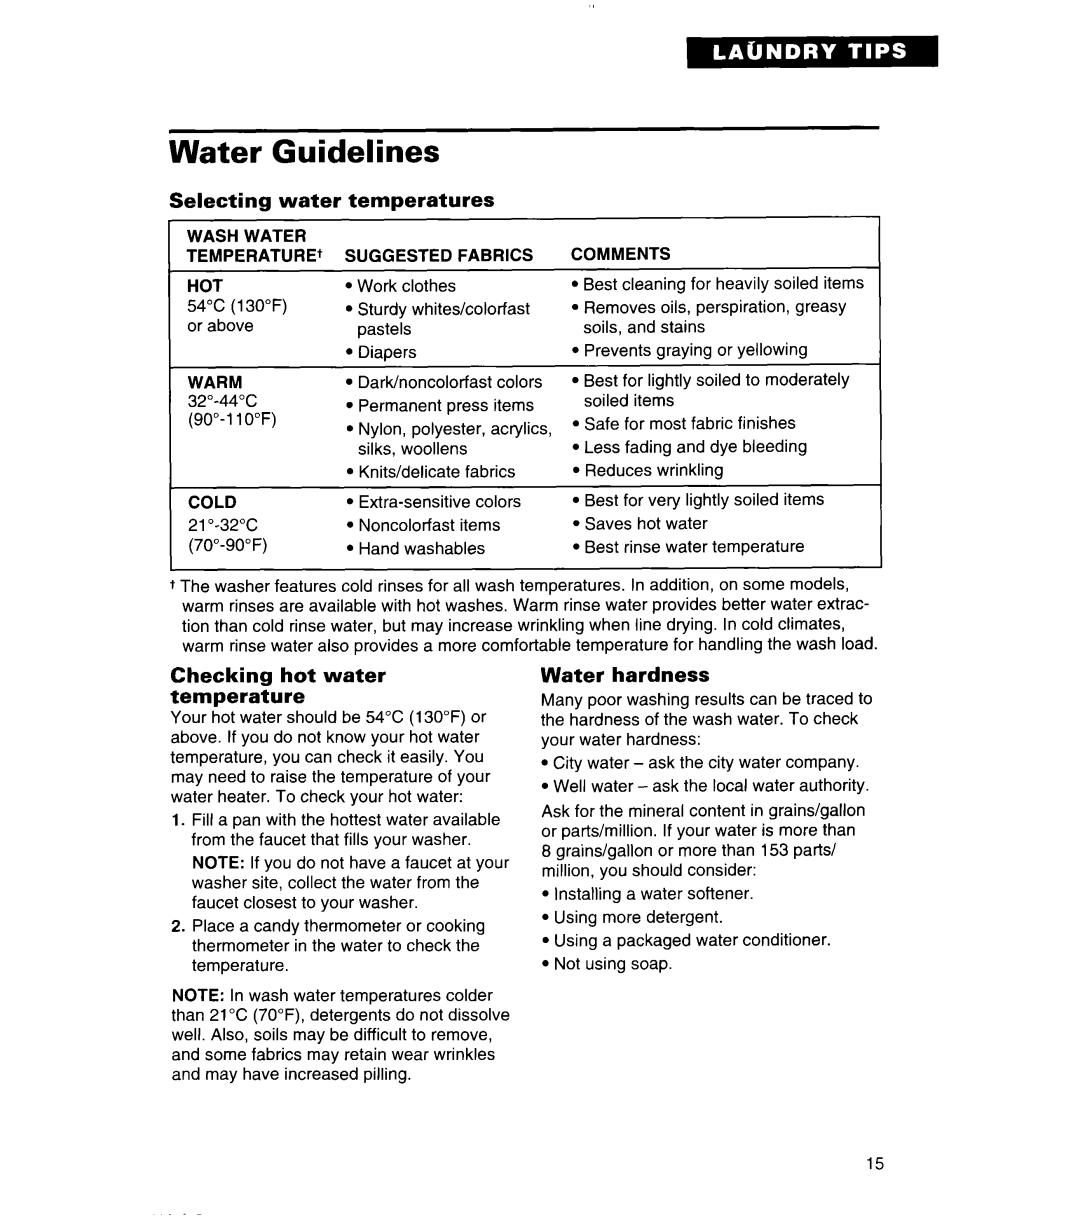 Whirlpool 3360464 warranty Water Guidelines, Selecting, temperatures, Checking hot water temperature, Water hardness 